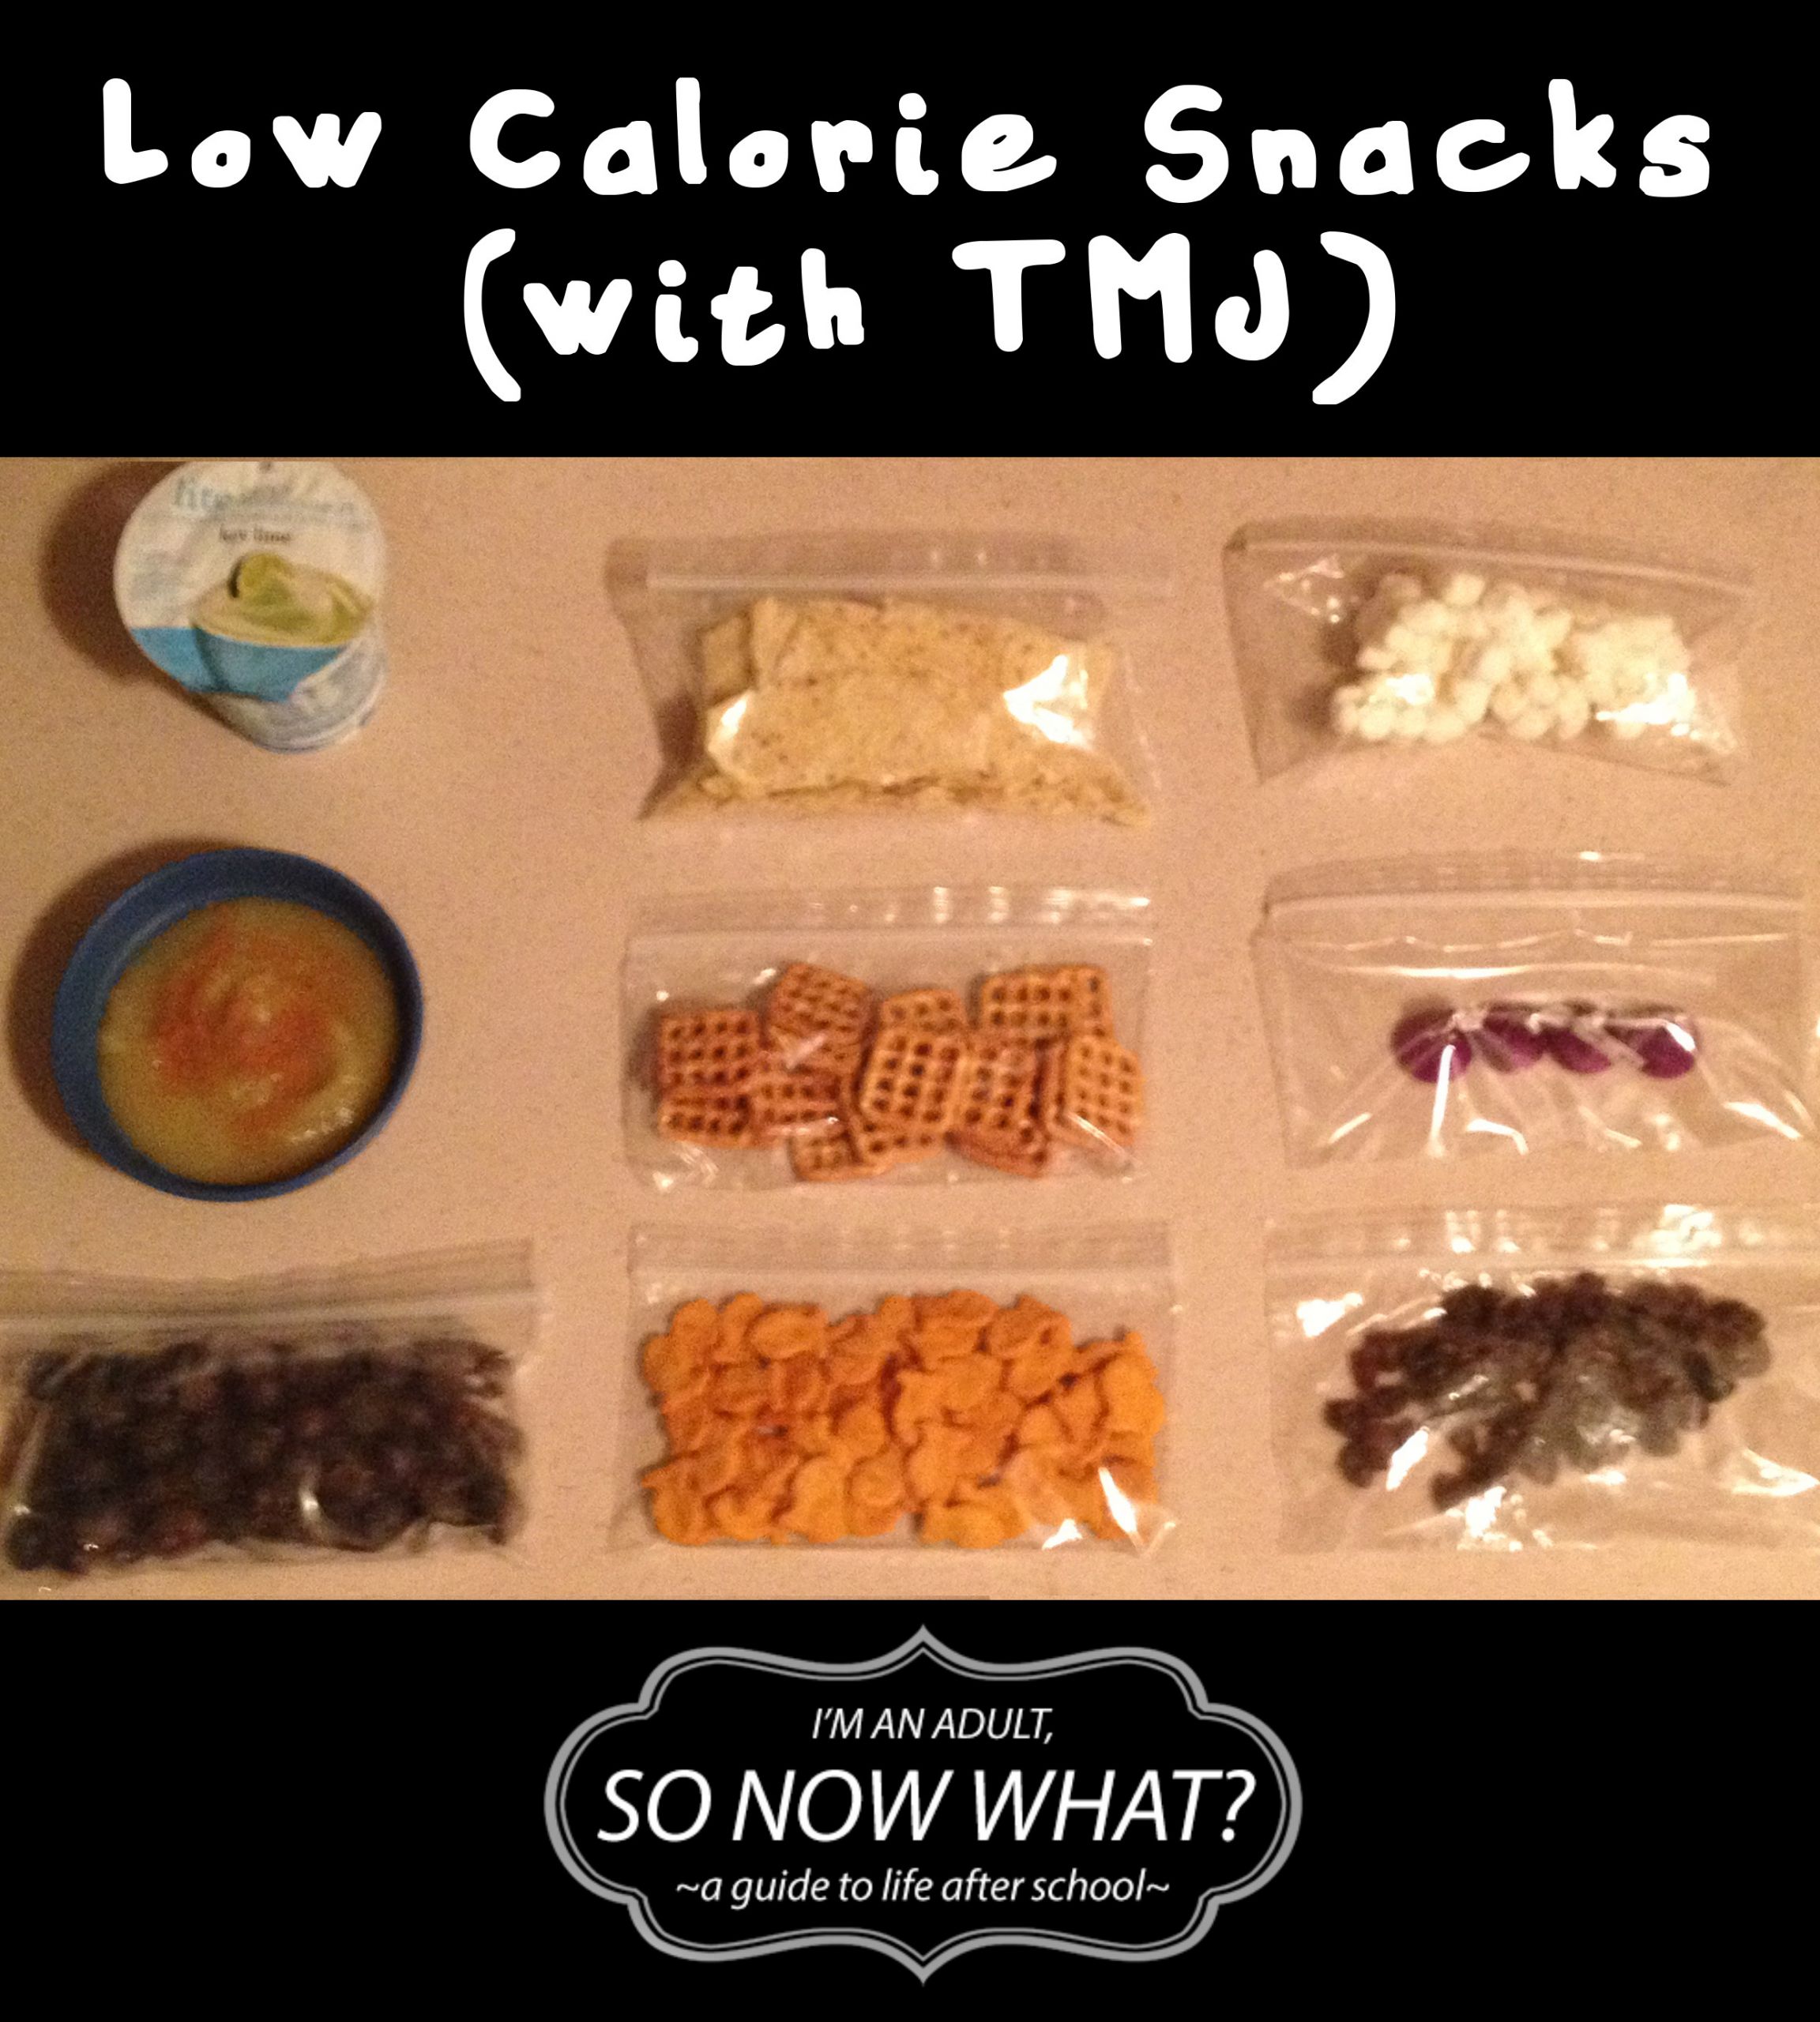 Low Calorie Healthy Snacks
 Low Calorie Snacks with TMJ